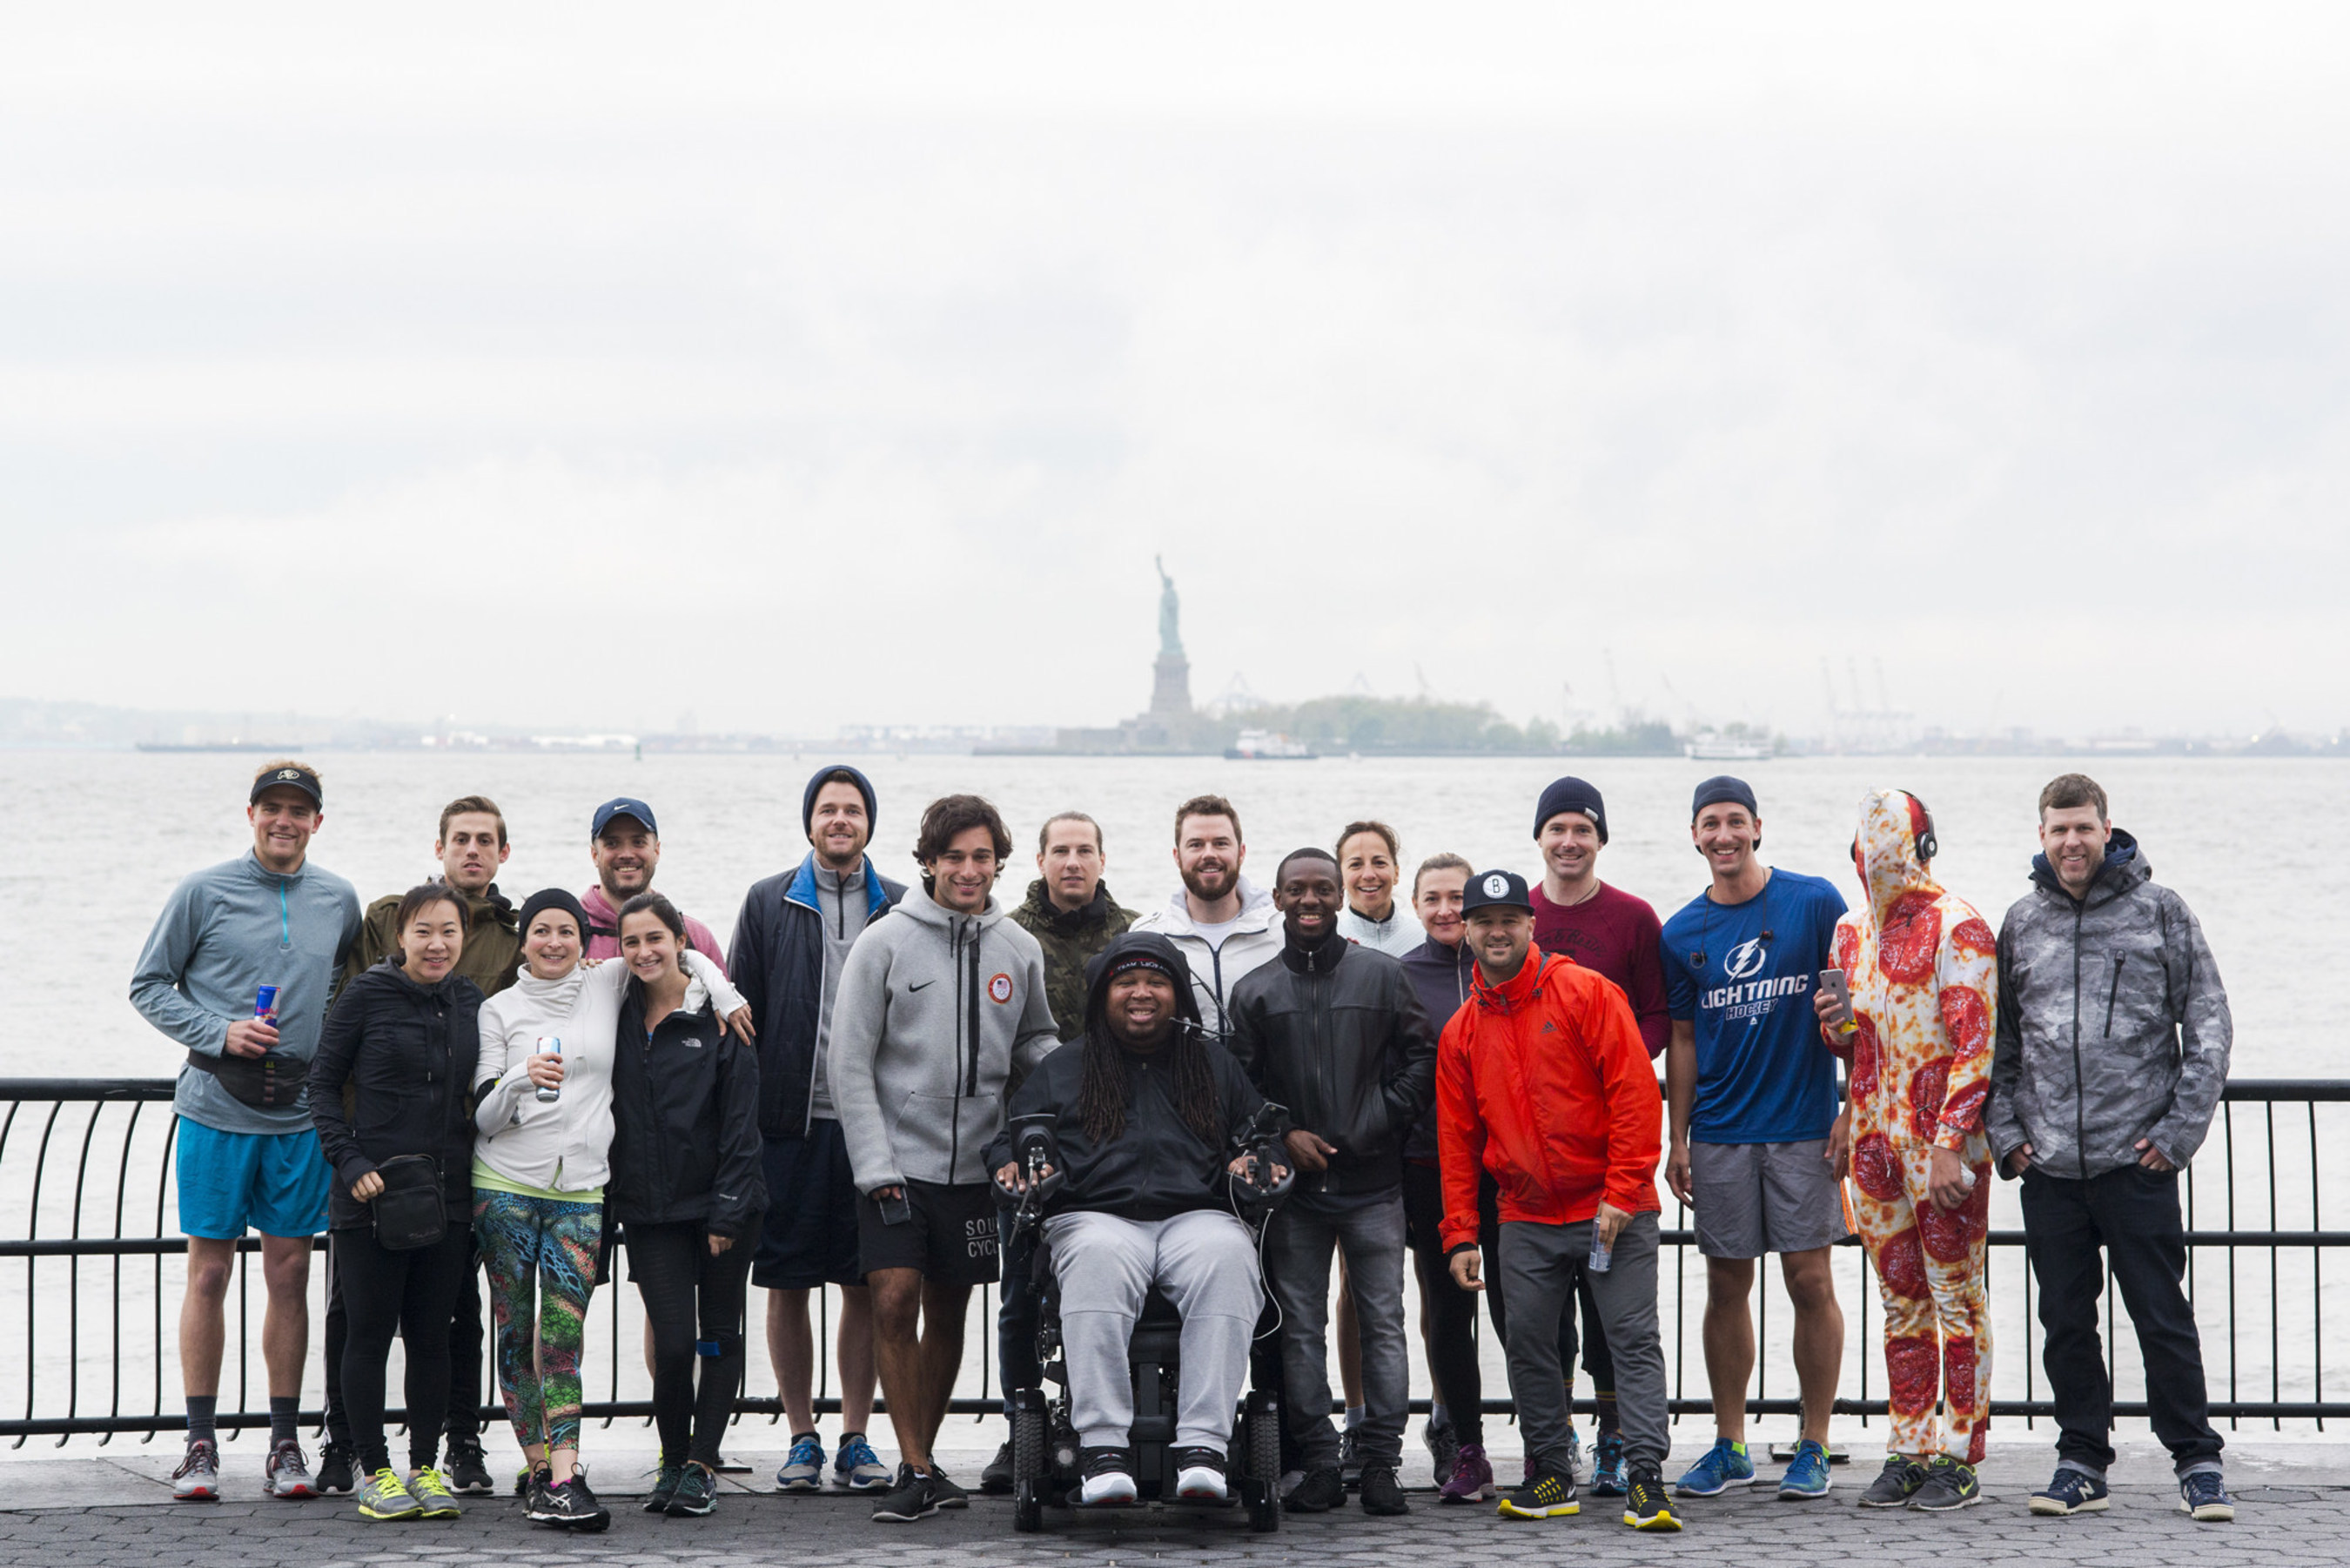 Eric LeGrand, a former Rutgers football player who was paralyzed in a 2010 game, hosted a Mother's Day Selfie Run with his mom Karen in New York's Battery Park to celebrate the Wings for Life World Run. Eric is a leading voice in shining a light on spinal cord injury research.